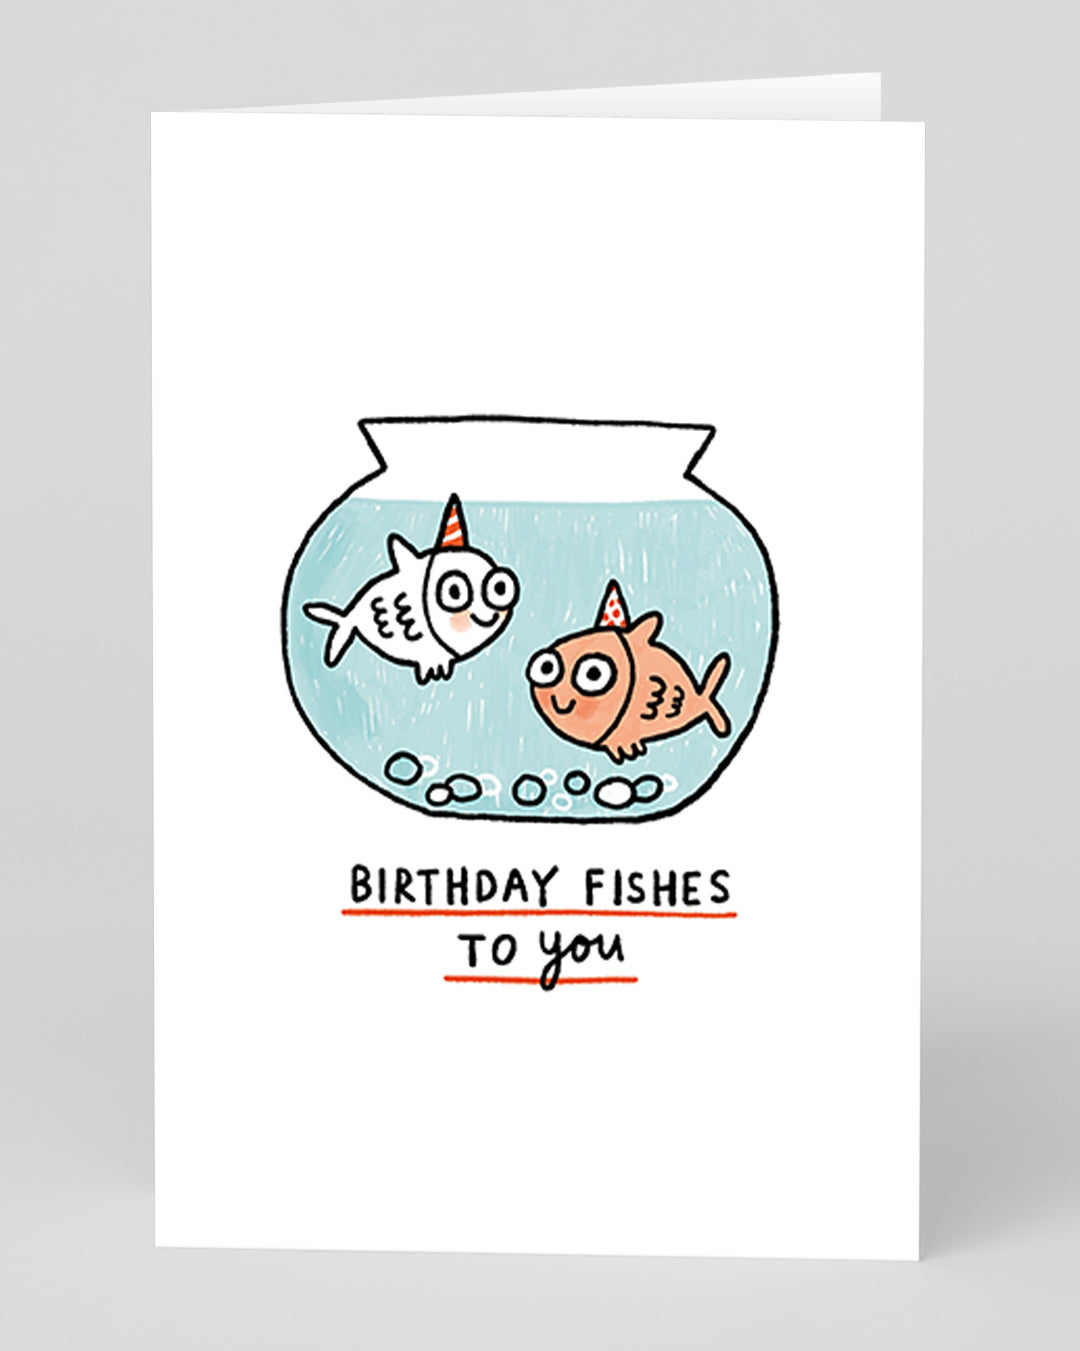 Funny Birthday Card Birthday Fishes To You Greeting Card